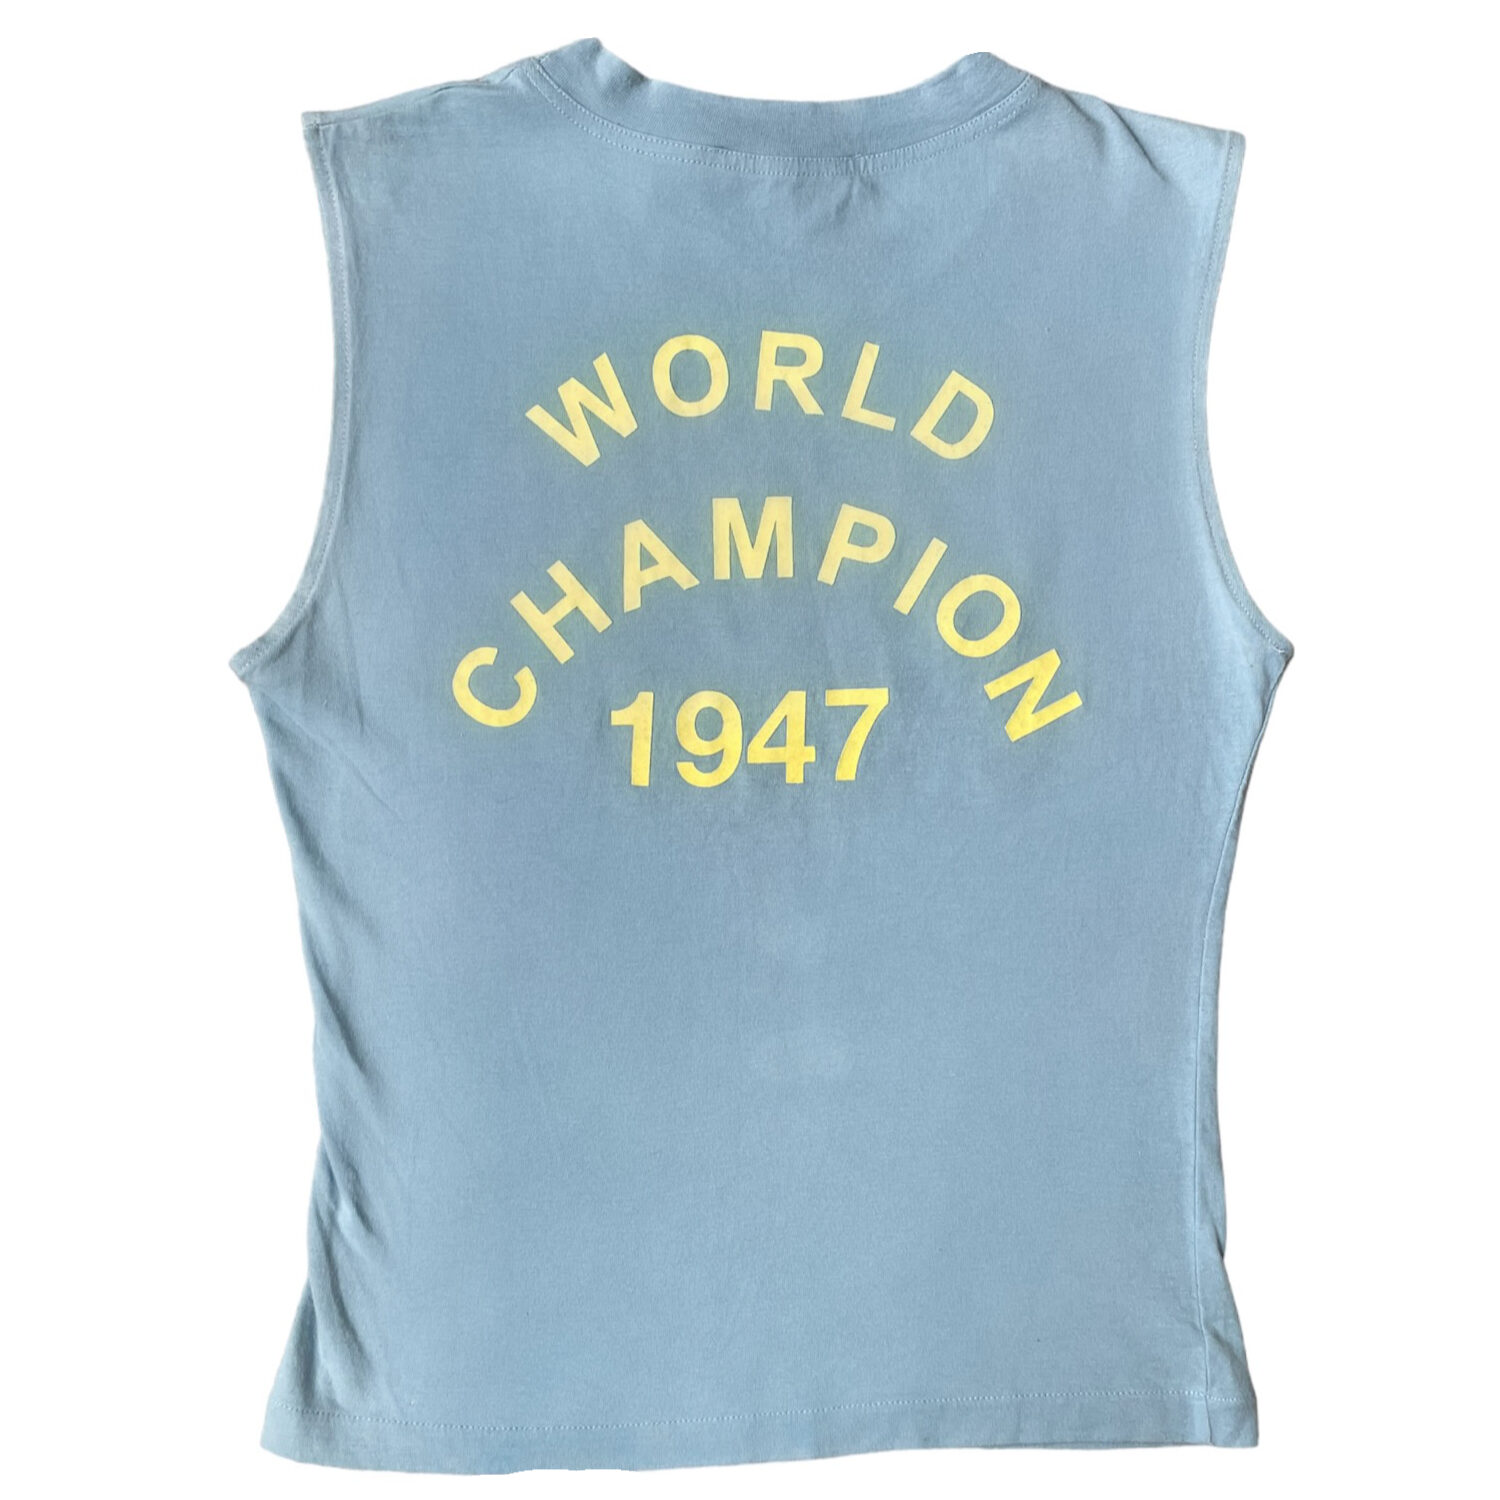 Vintage Dior 'J'Adore Dior' Spellout Tank Vest Top in Baby Blue / Yellow UK 10 | NITRYL